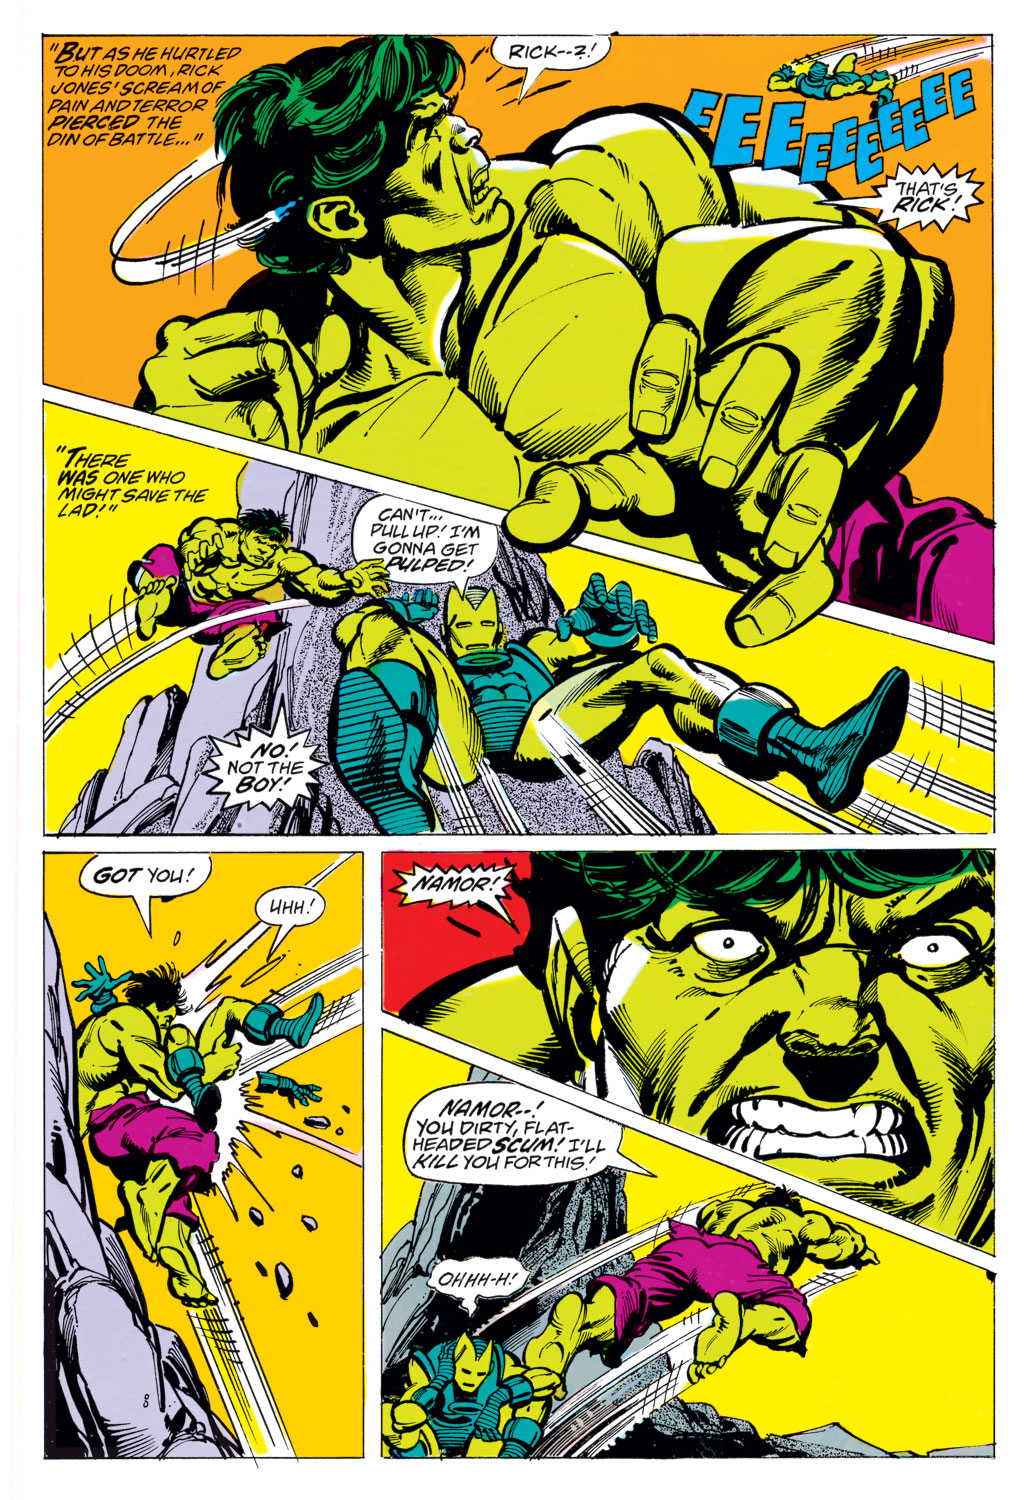 What If? (1977) issue 3 - The Avengers had never been - Page 33